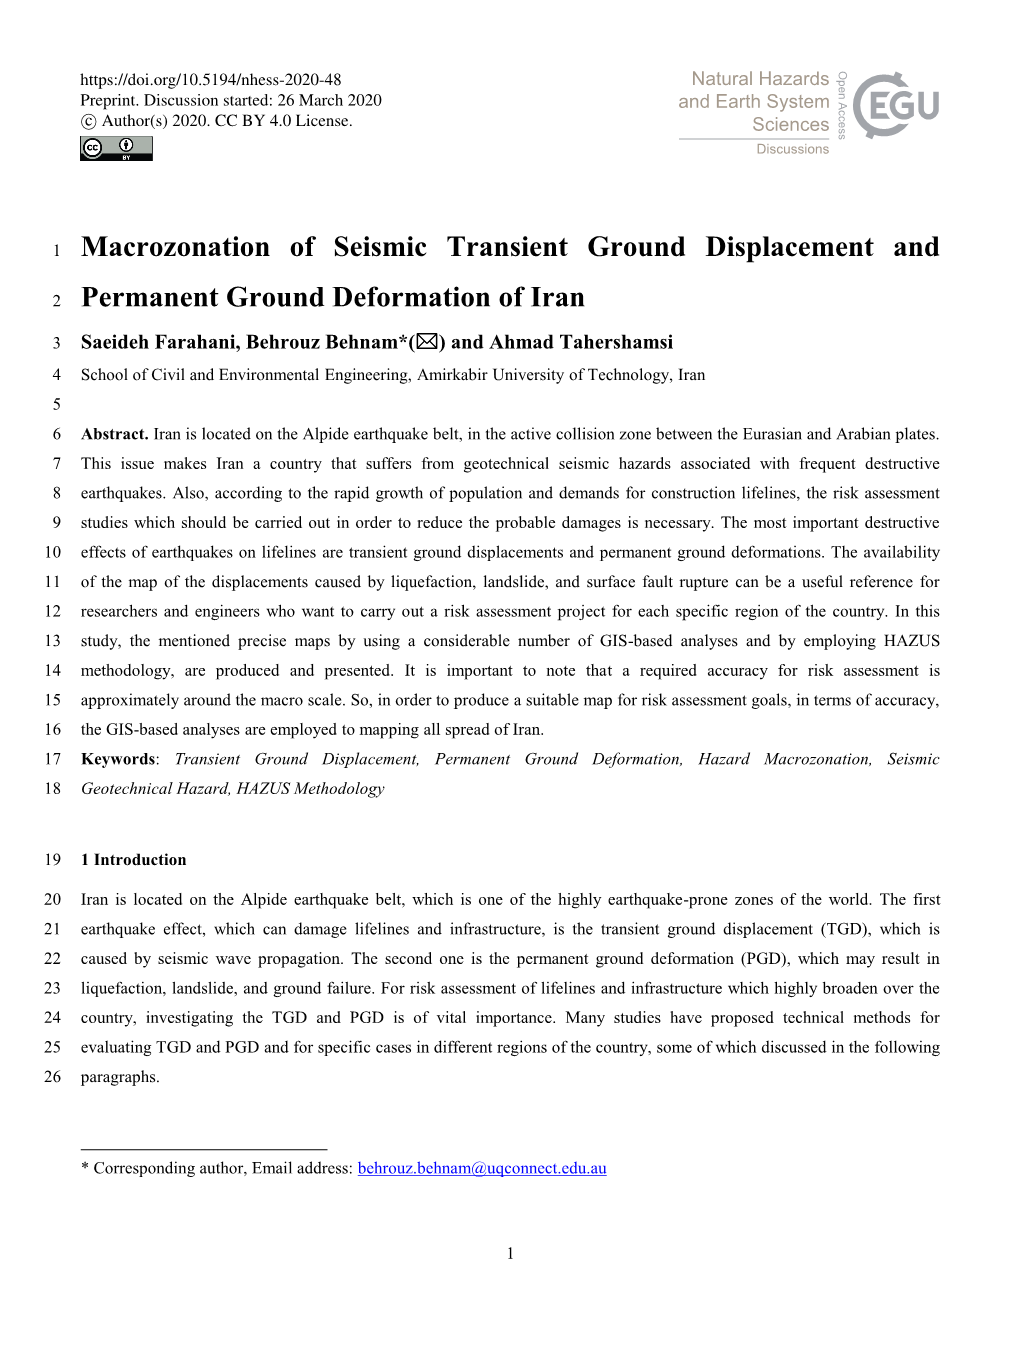 Macrozonation of Seismic Transient Ground Displacement And